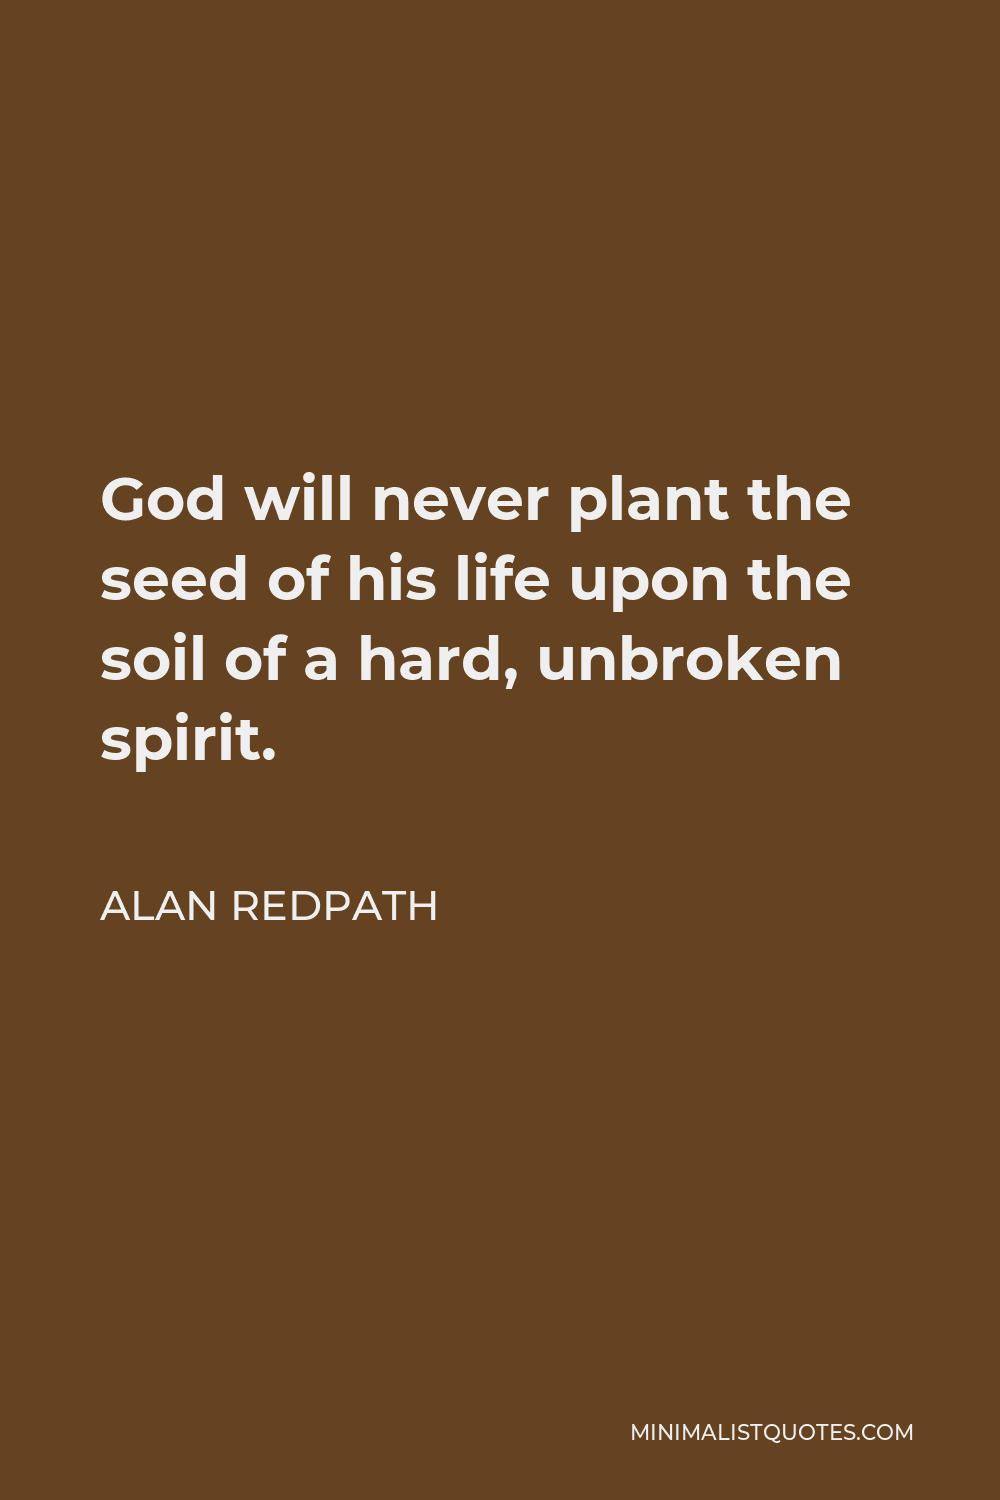 Alan Redpath Quote - God will never plant the seed of his life upon the soil of a hard, unbroken spirit.